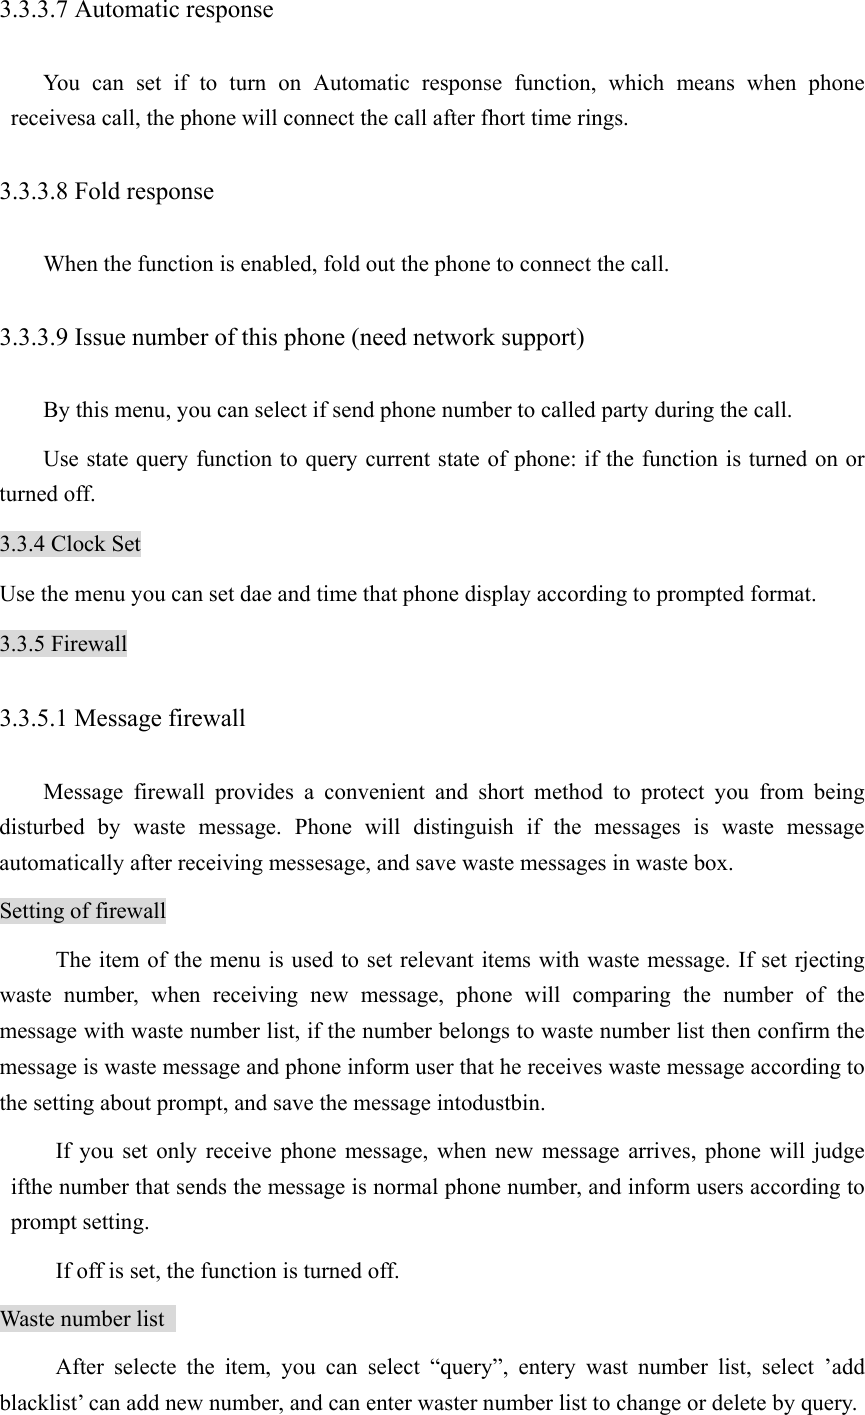 3.3.3.7 Automatic response You can set if to turn on Automatic response function, which means when phone receivesa call, the phone will connect the call after fhort time rings. 3.3.3.8 Fold response When the function is enabled, fold out the phone to connect the call. 3.3.3.9 Issue number of this phone (need network support)   By this menu, you can select if send phone number to called party during the call.   Use state query function to query current state of phone: if the function is turned on or turned off. 3.3.4 Clock Set Use the menu you can set dae and time that phone display according to prompted format. 3.3.5 Firewall 3.3.5.1 Message firewall Message firewall provides a convenient and short method to protect you from being disturbed by waste message. Phone will distinguish if the messages is waste message automatically after receiving messesage, and save waste messages in waste box.   Setting of firewall The item of the menu is used to set relevant items with waste message. If set rjecting waste number, when receiving new message, phone will comparing the number of the message with waste number list, if the number belongs to waste number list then confirm the message is waste message and phone inform user that he receives waste message according to the setting about prompt, and save the message intodustbin.   If you set only receive phone message, when new message arrives, phone will judge ifthe number that sends the message is normal phone number, and inform users according to prompt setting.   If off is set, the function is turned off.   Waste number list   After selecte the item, you can select “query”, entery wast number list, select ’add blacklist’ can add new number, and can enter waster number list to change or delete by query.   